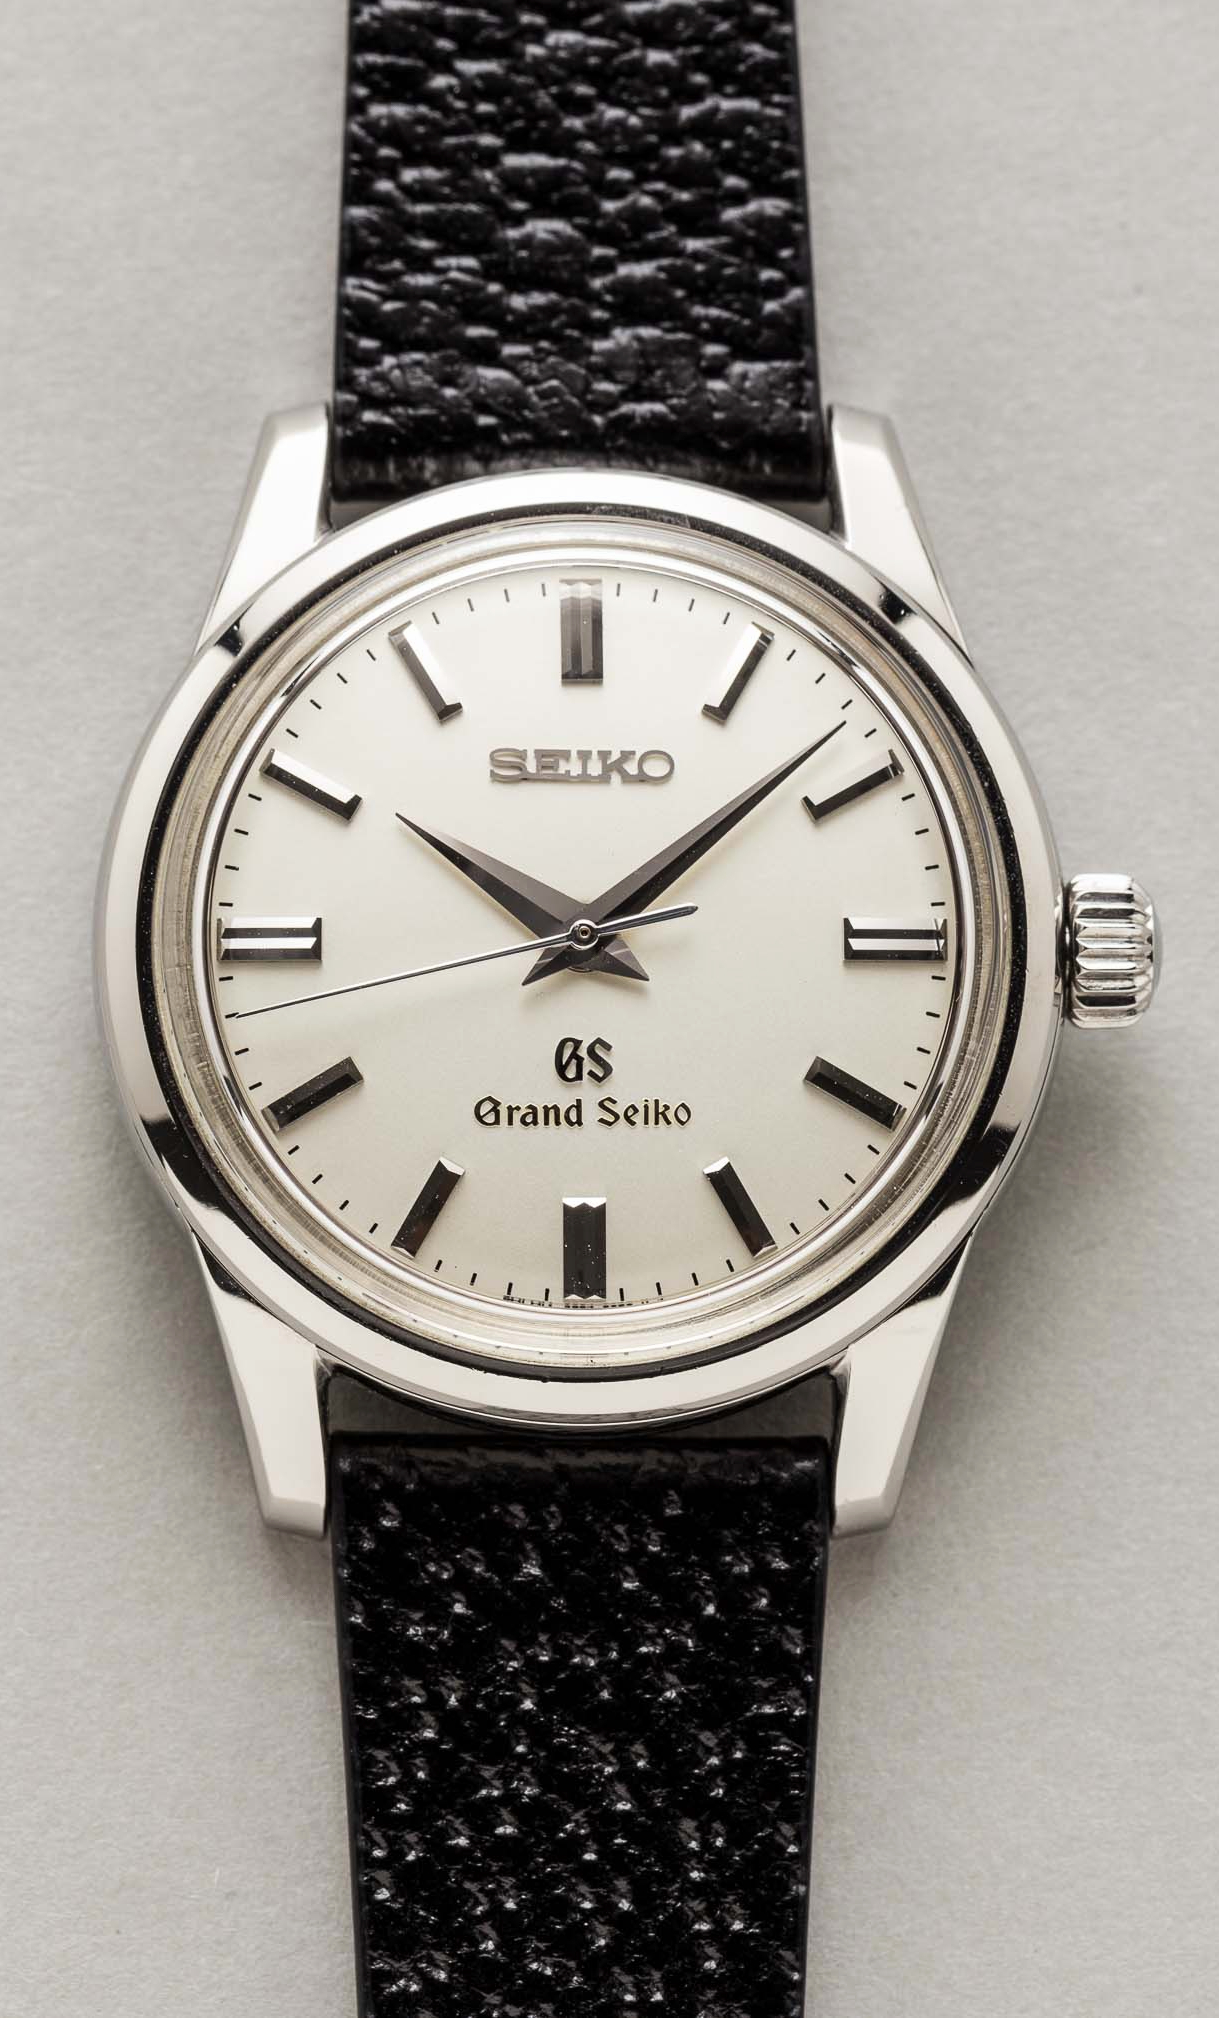 Grand Seiko SBGW001 JDM - Shuck the Oyster Vintage Watches